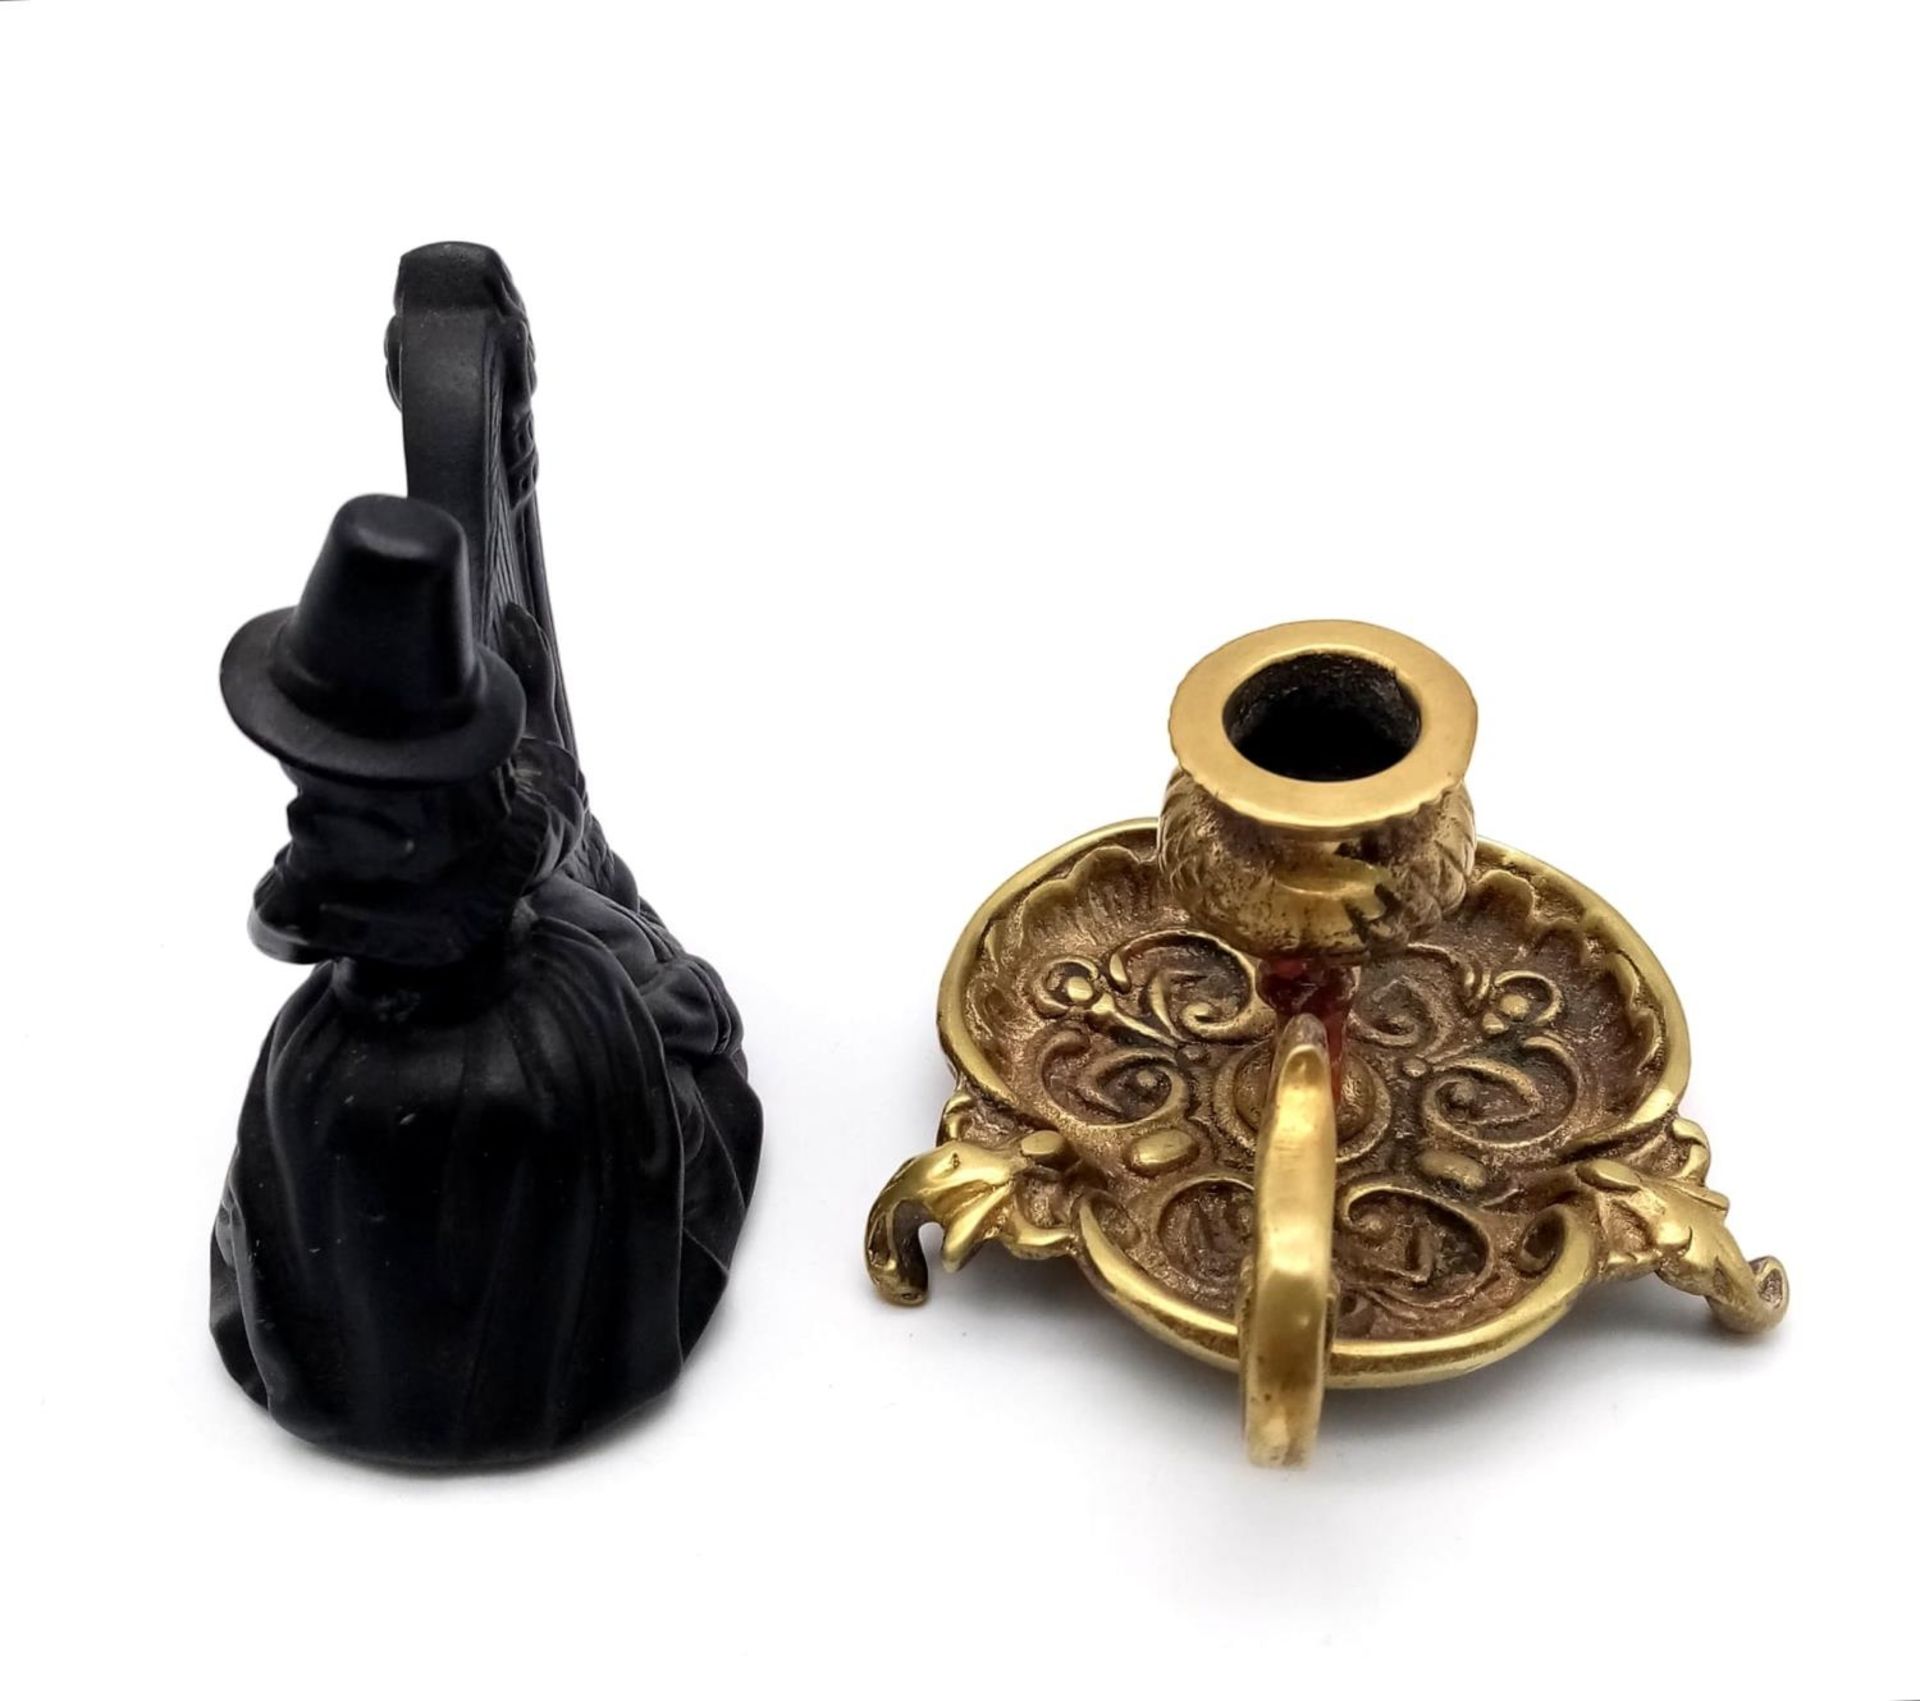 A Vintage Small Brass Candle Holder and a Coal Lady Figurine - 10cm. - Image 3 of 4